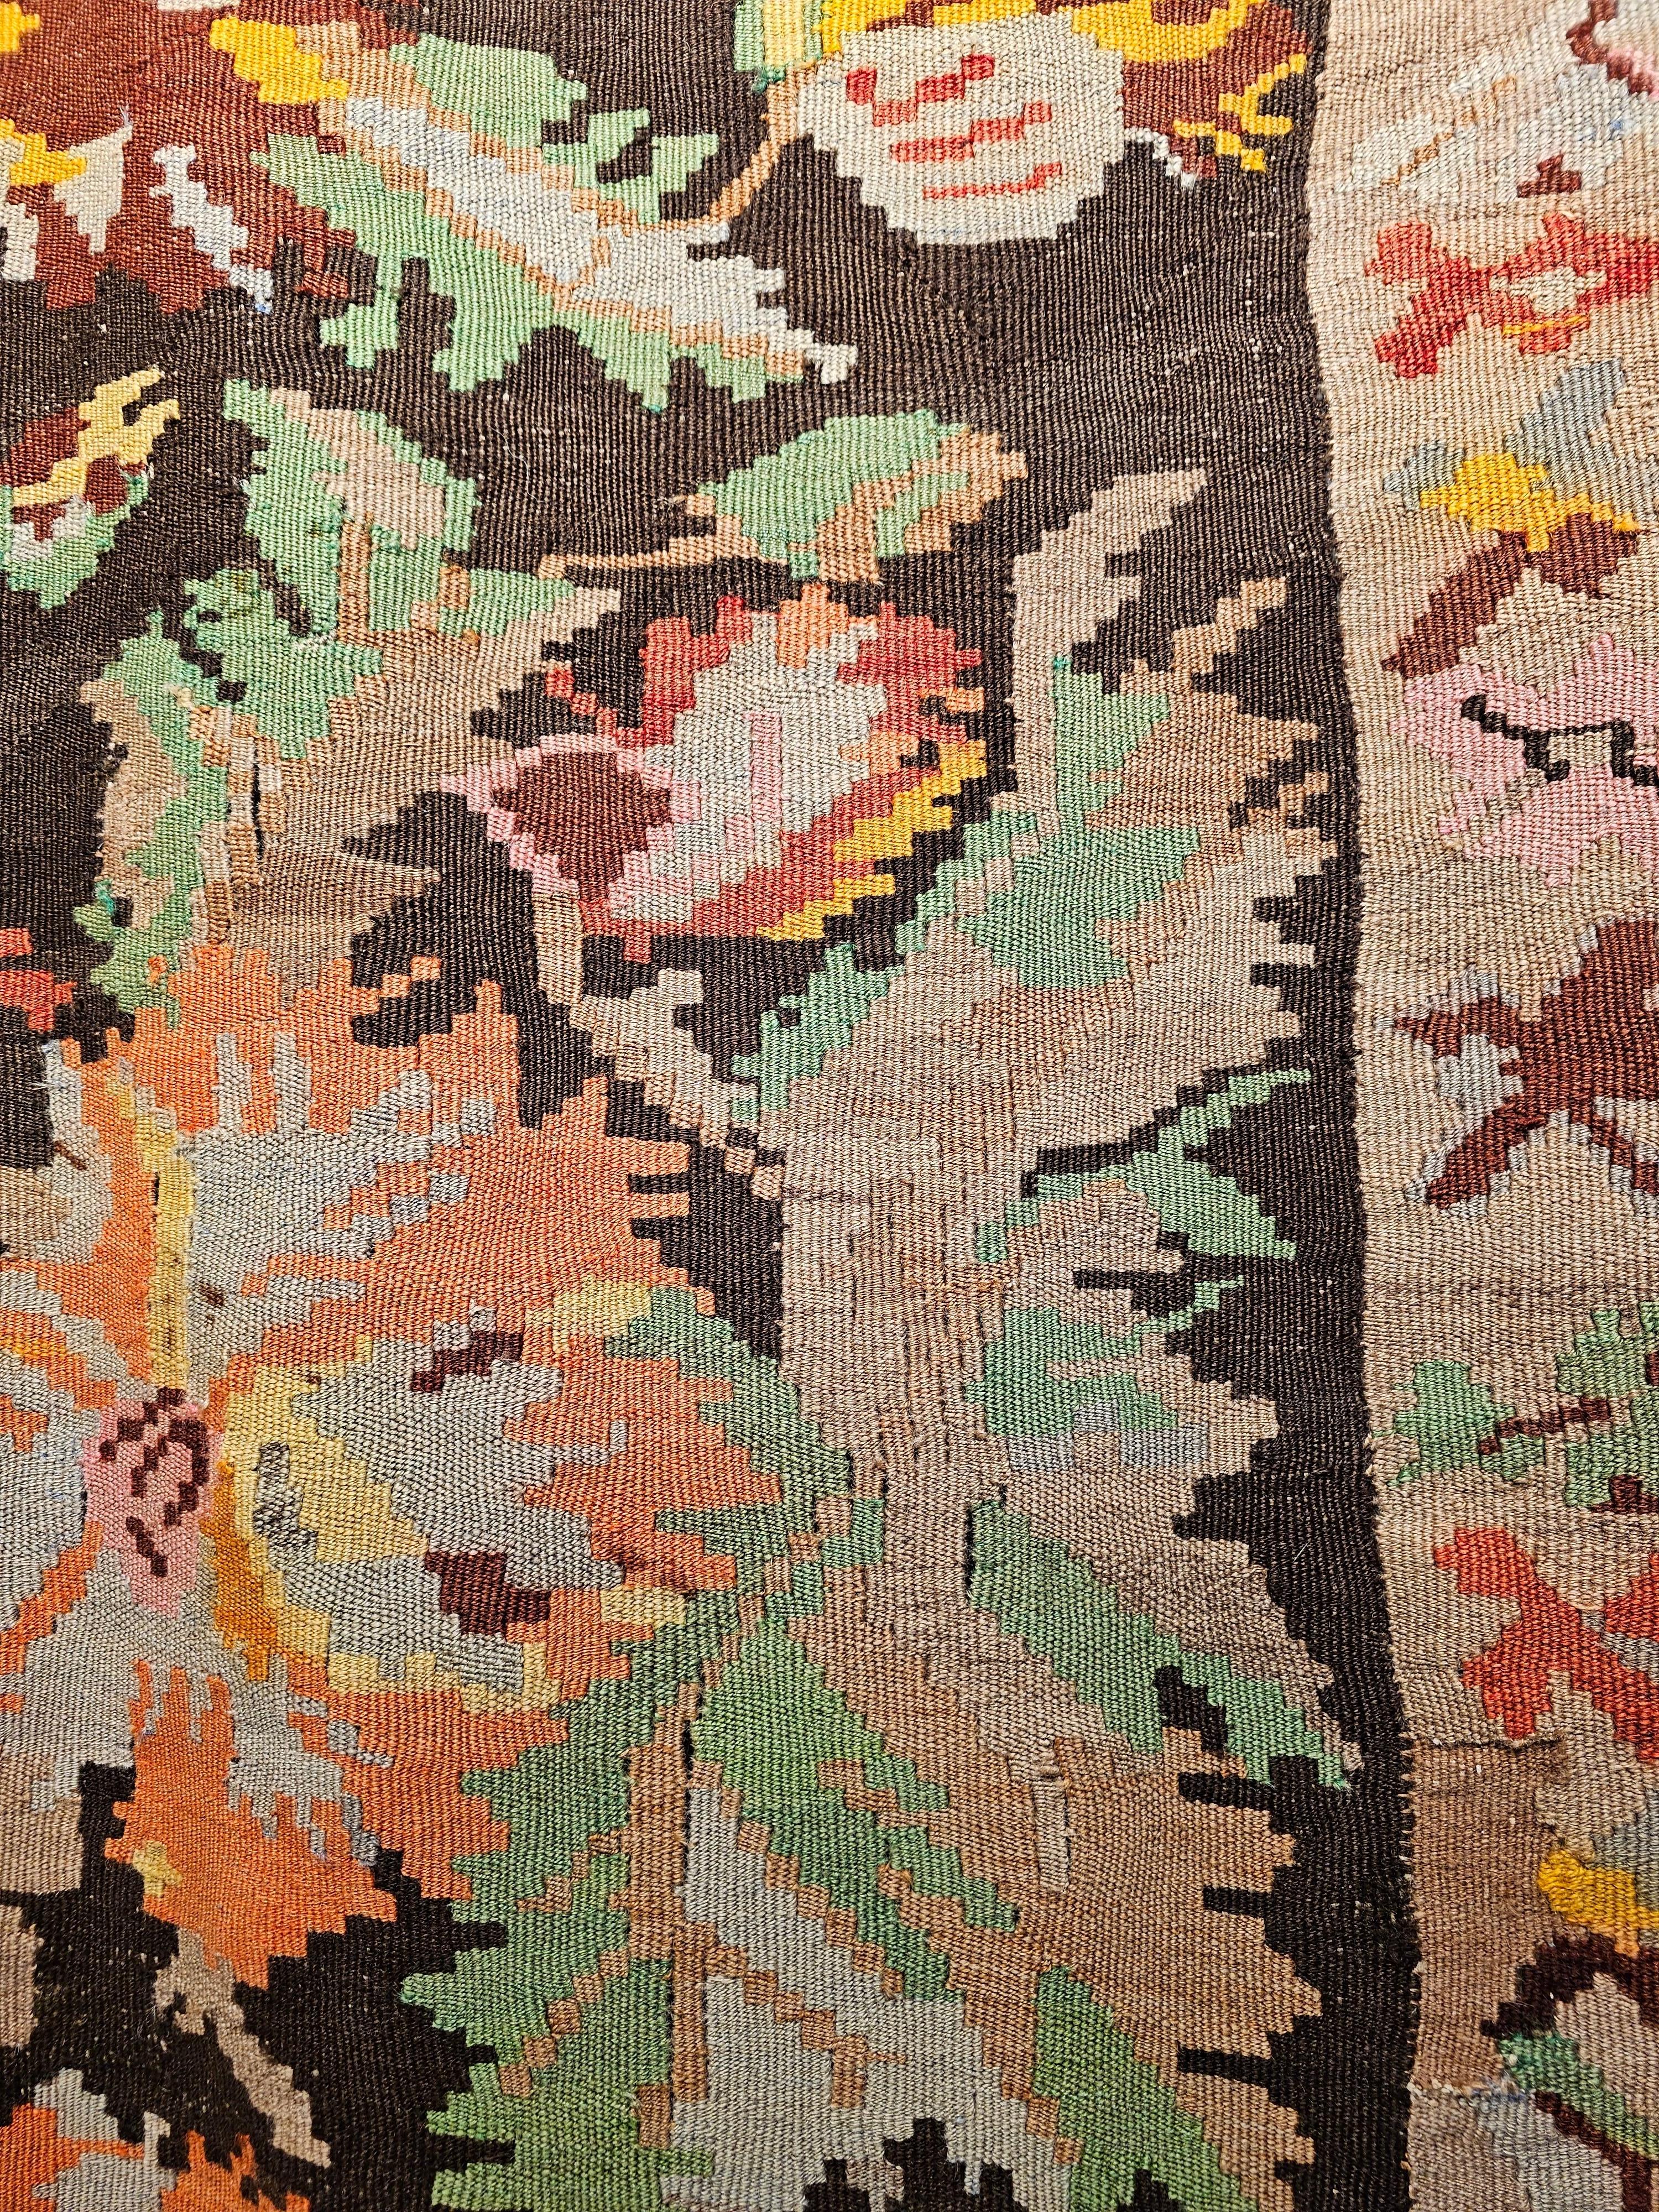 Mid-20th Century Vintage Karabagh Kilim Runner with Large Floral Designs and Vibrant Colors For Sale